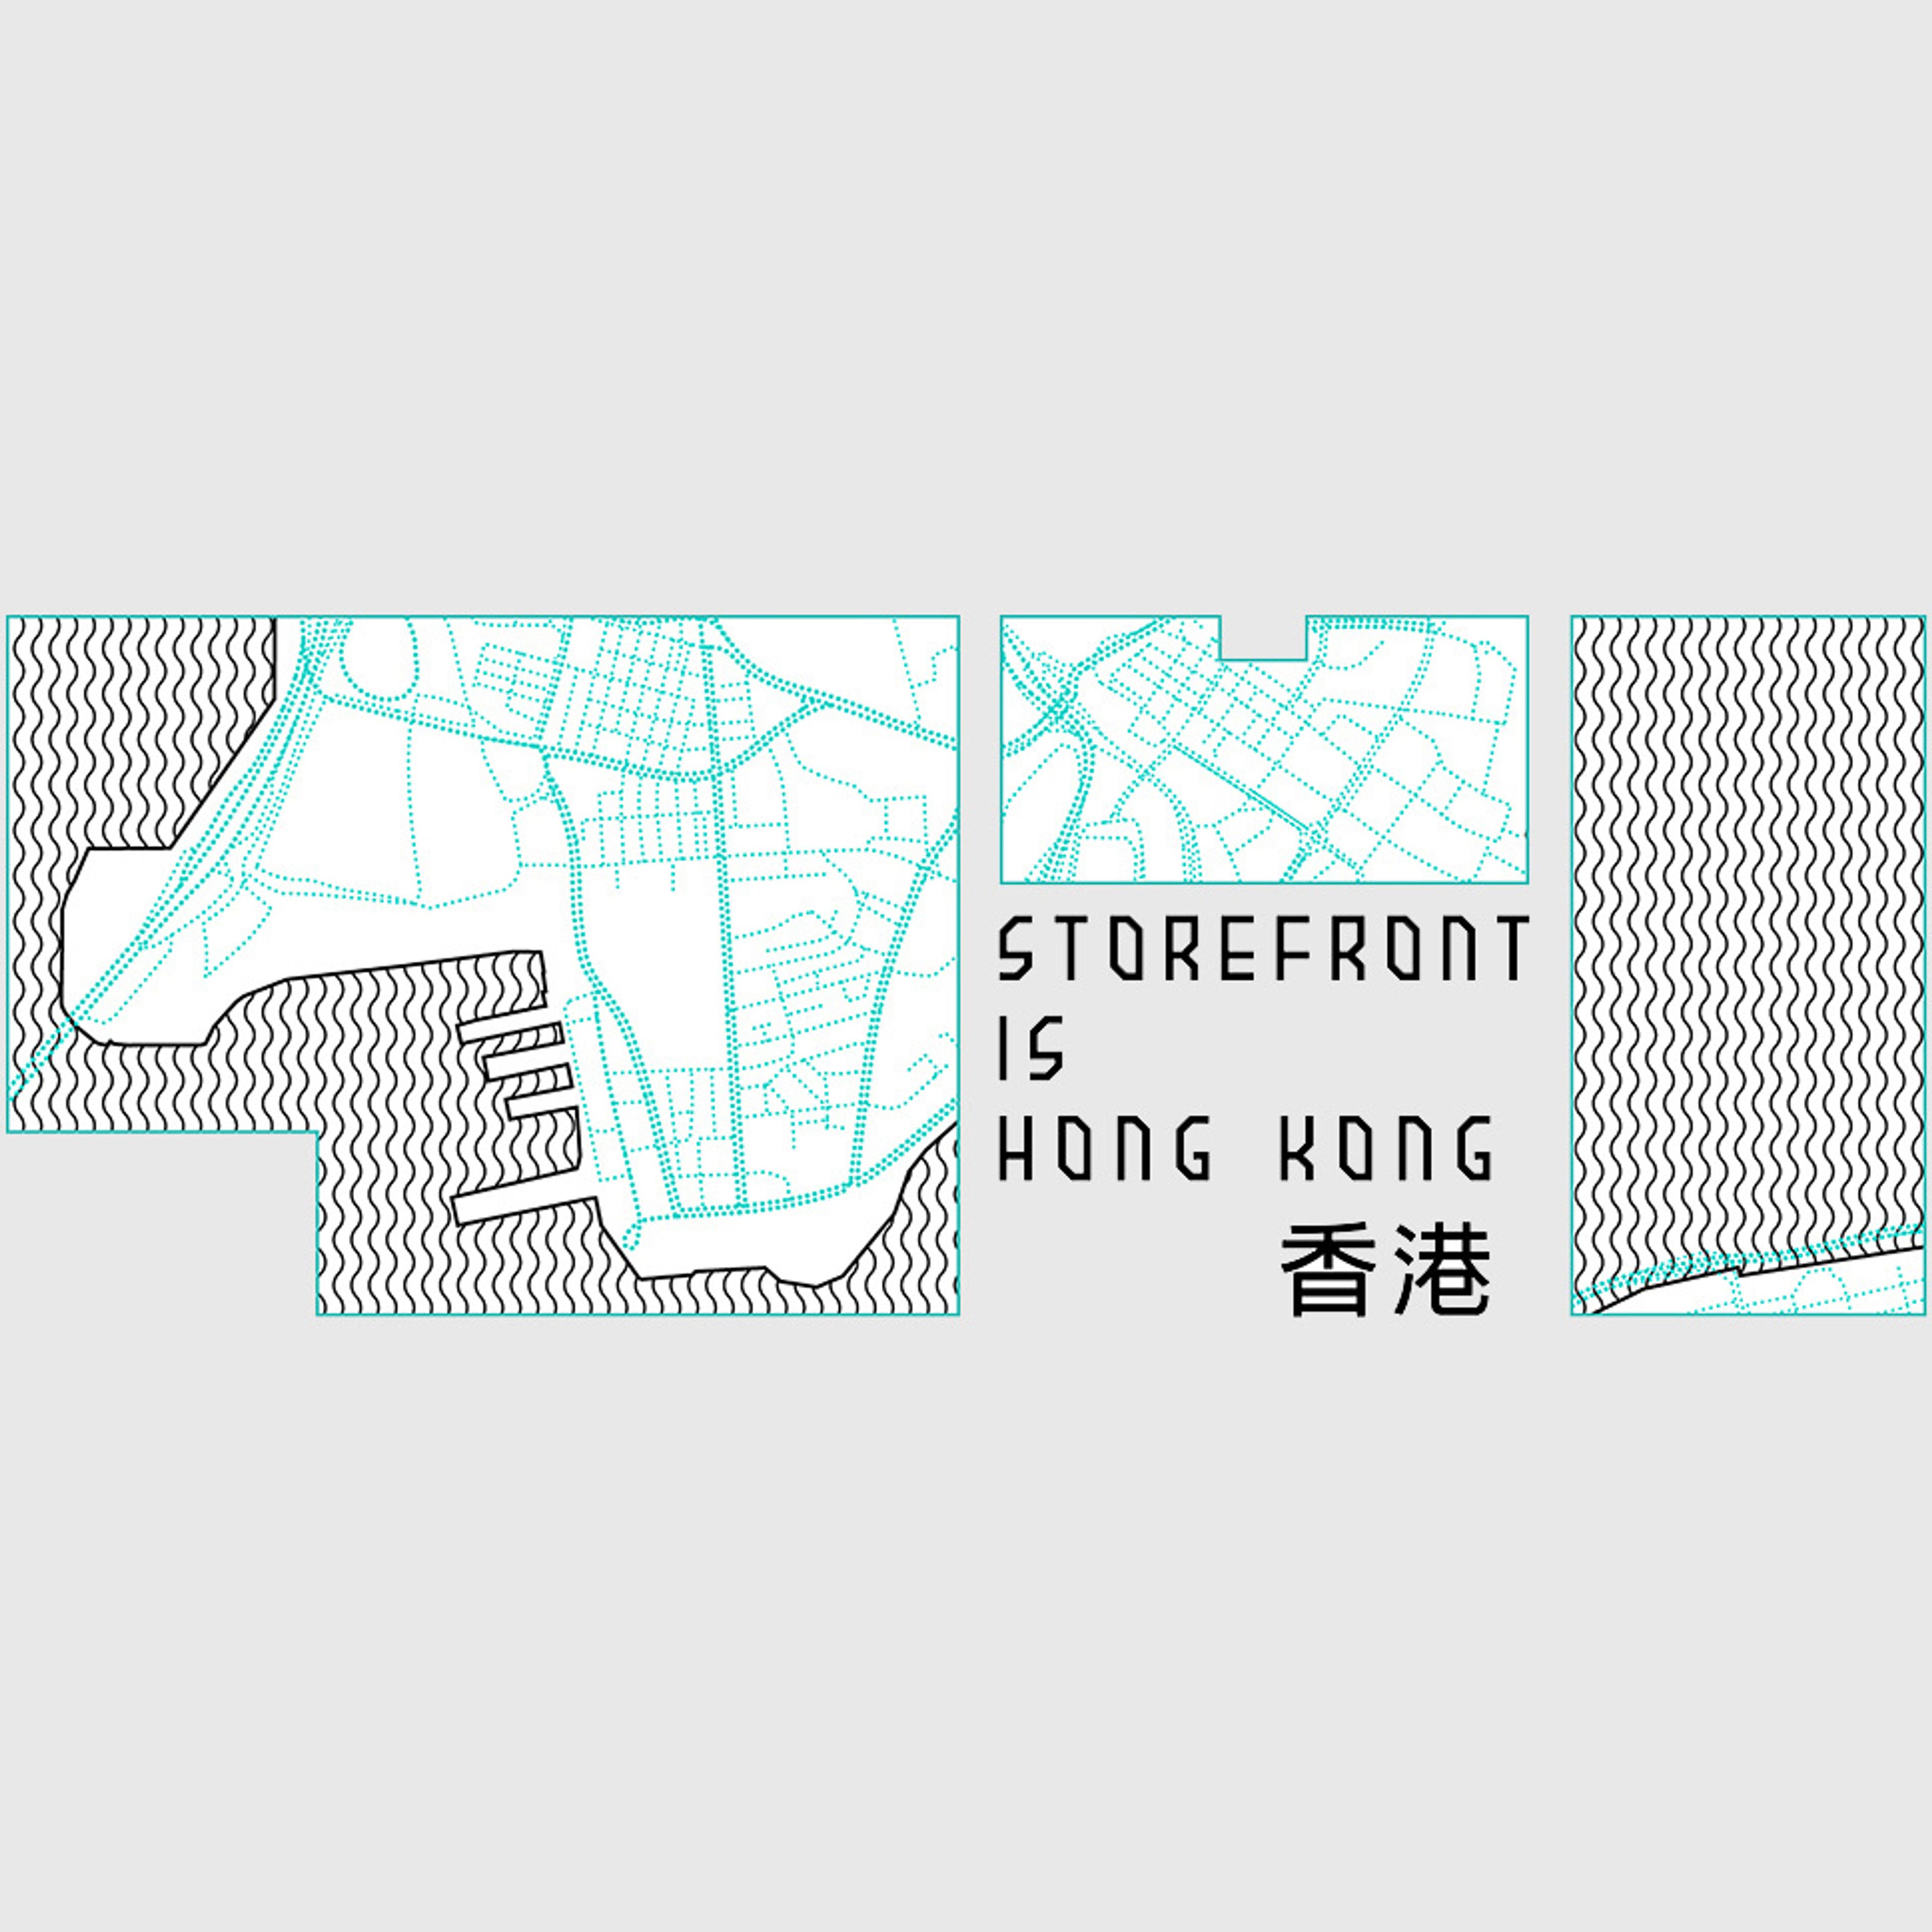 Stylised map of TST in Hong Kong